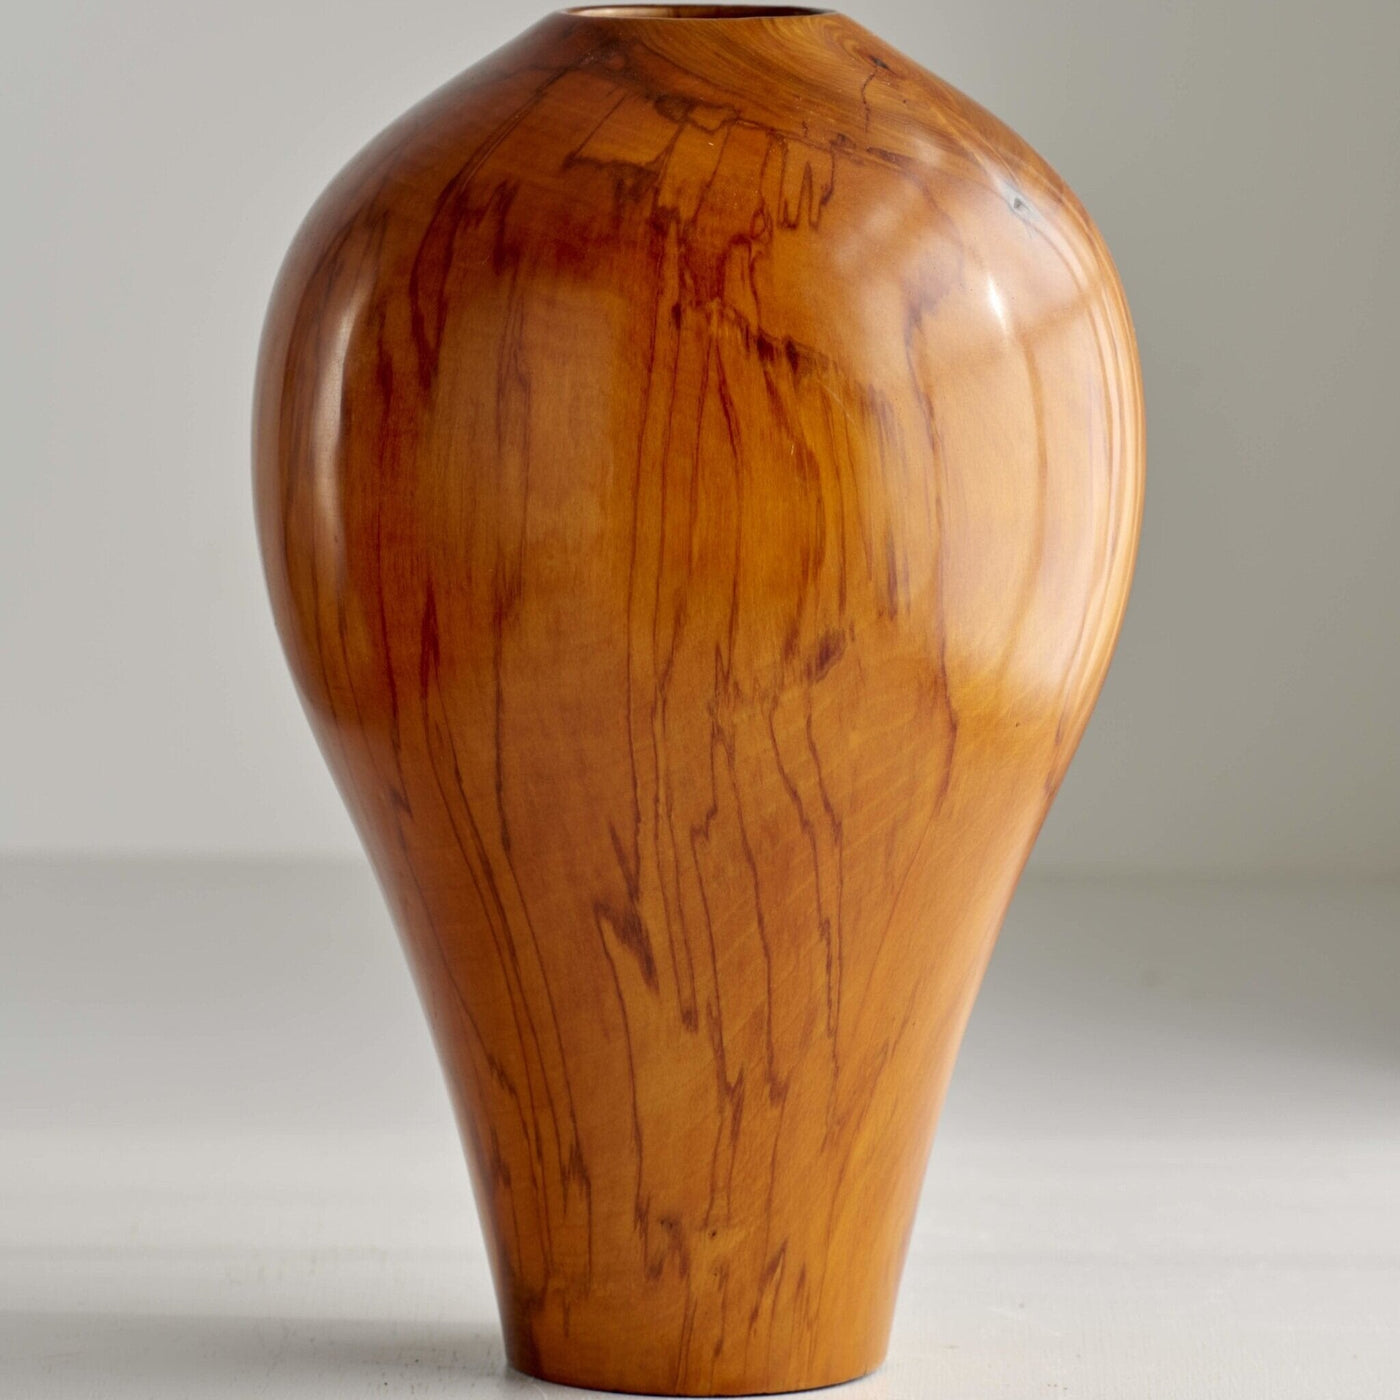 Wooden Vase By Michael Foster